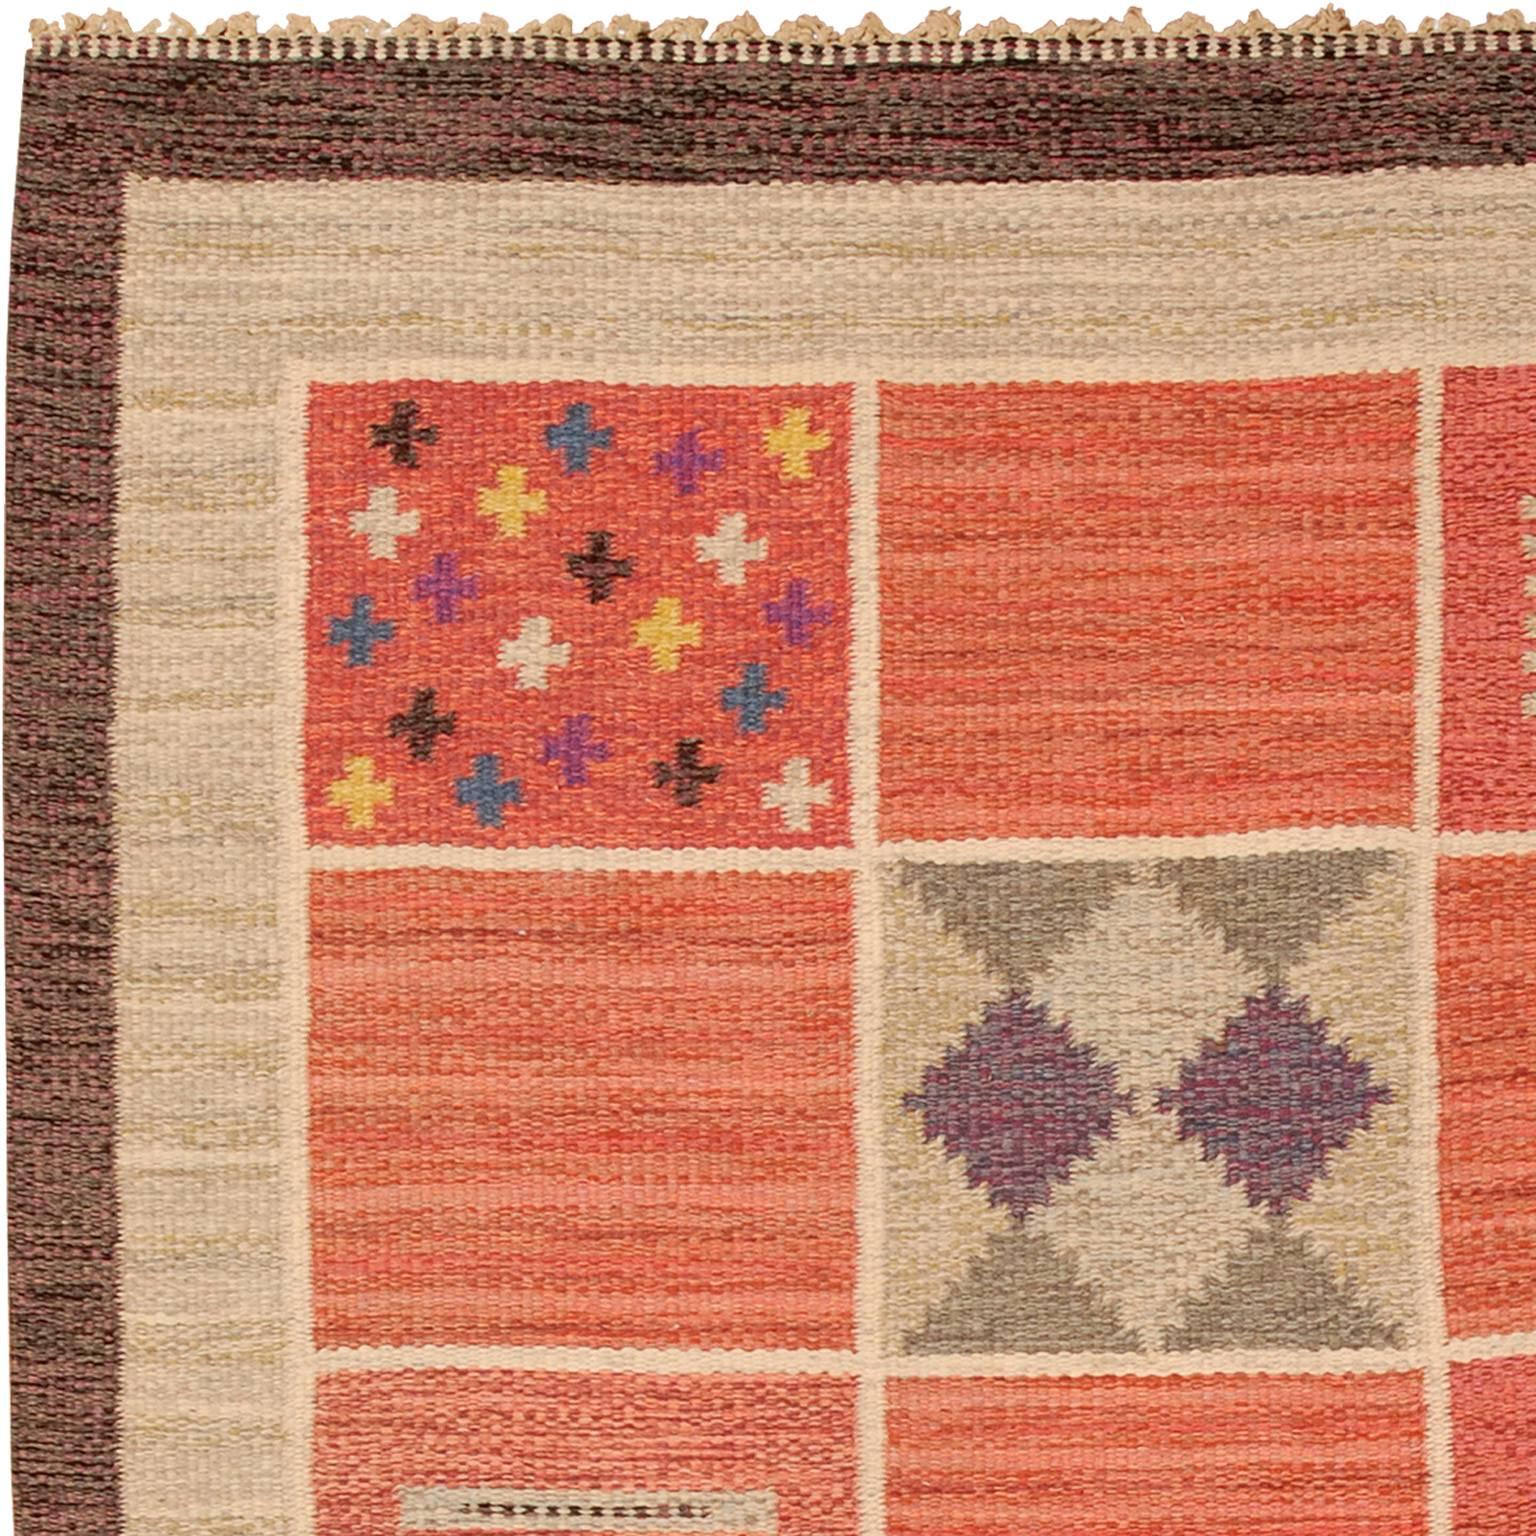 Hand-Woven Mid-20th Century Swedish Flat-Weave Rug For Sale